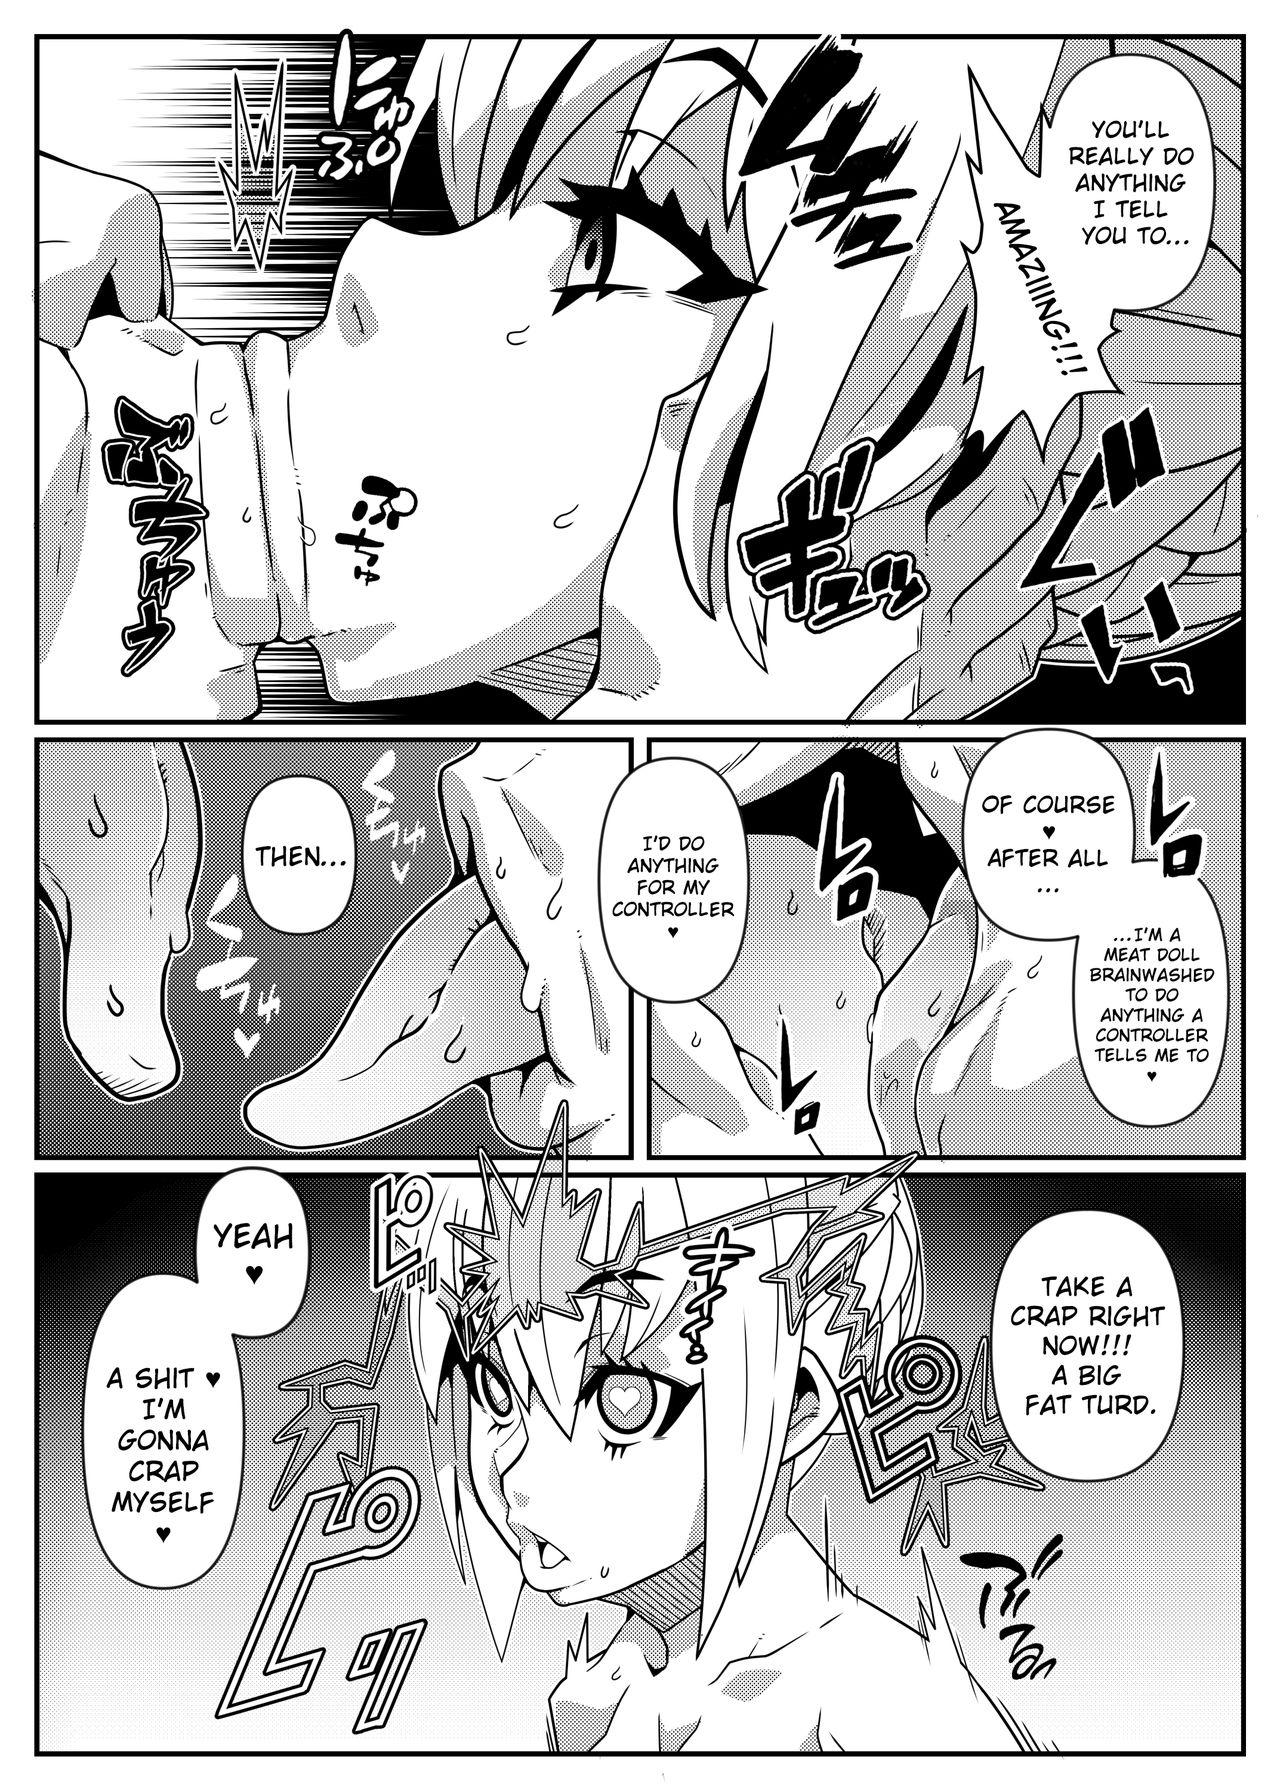 Camgirls MIND CONTROL GIRL 14 - Fate grand order Bigtits - Page 8